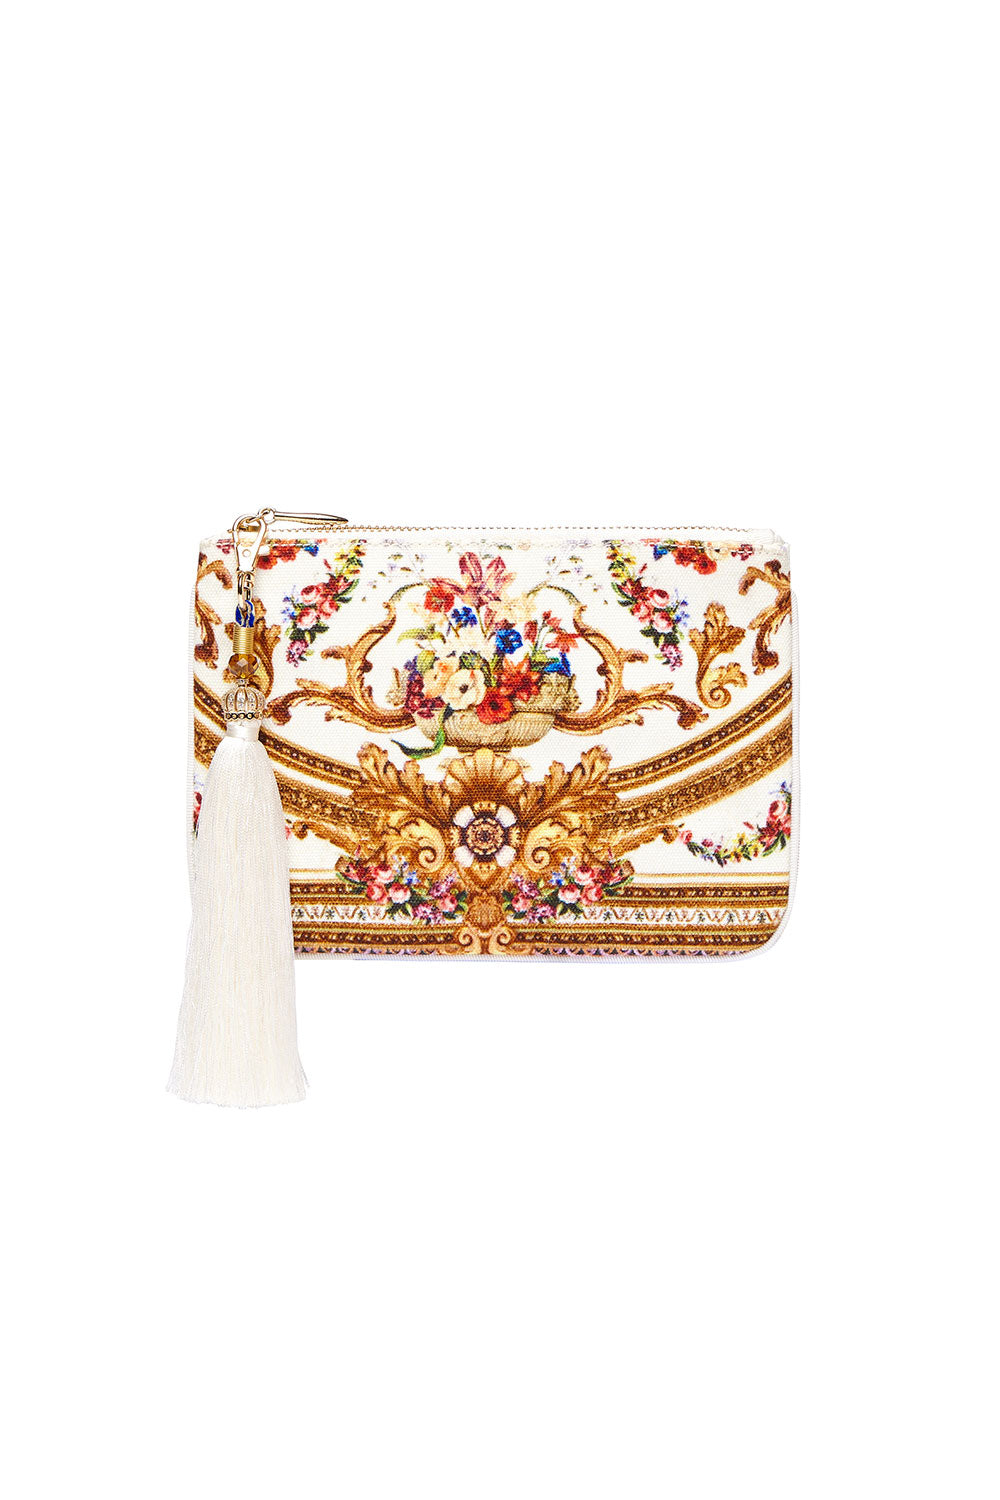 PHONE AND COIN PURSE OLYMPE ODE